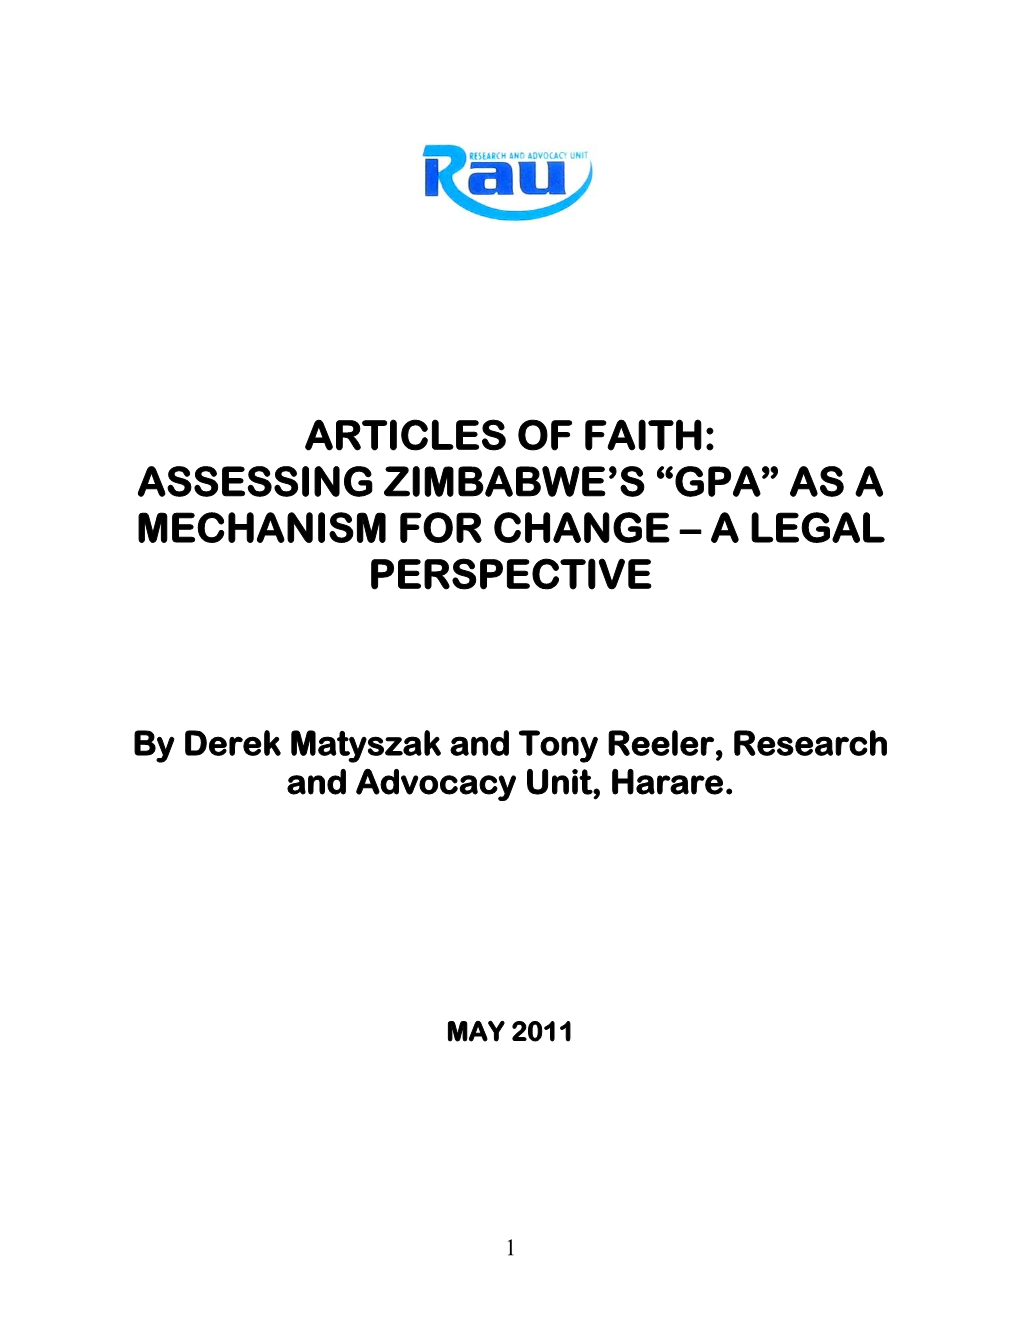 Articles of Faith: Assessing Zimbabwe’S “Gpa” As a Mechanism for Change – a Legal Perspective